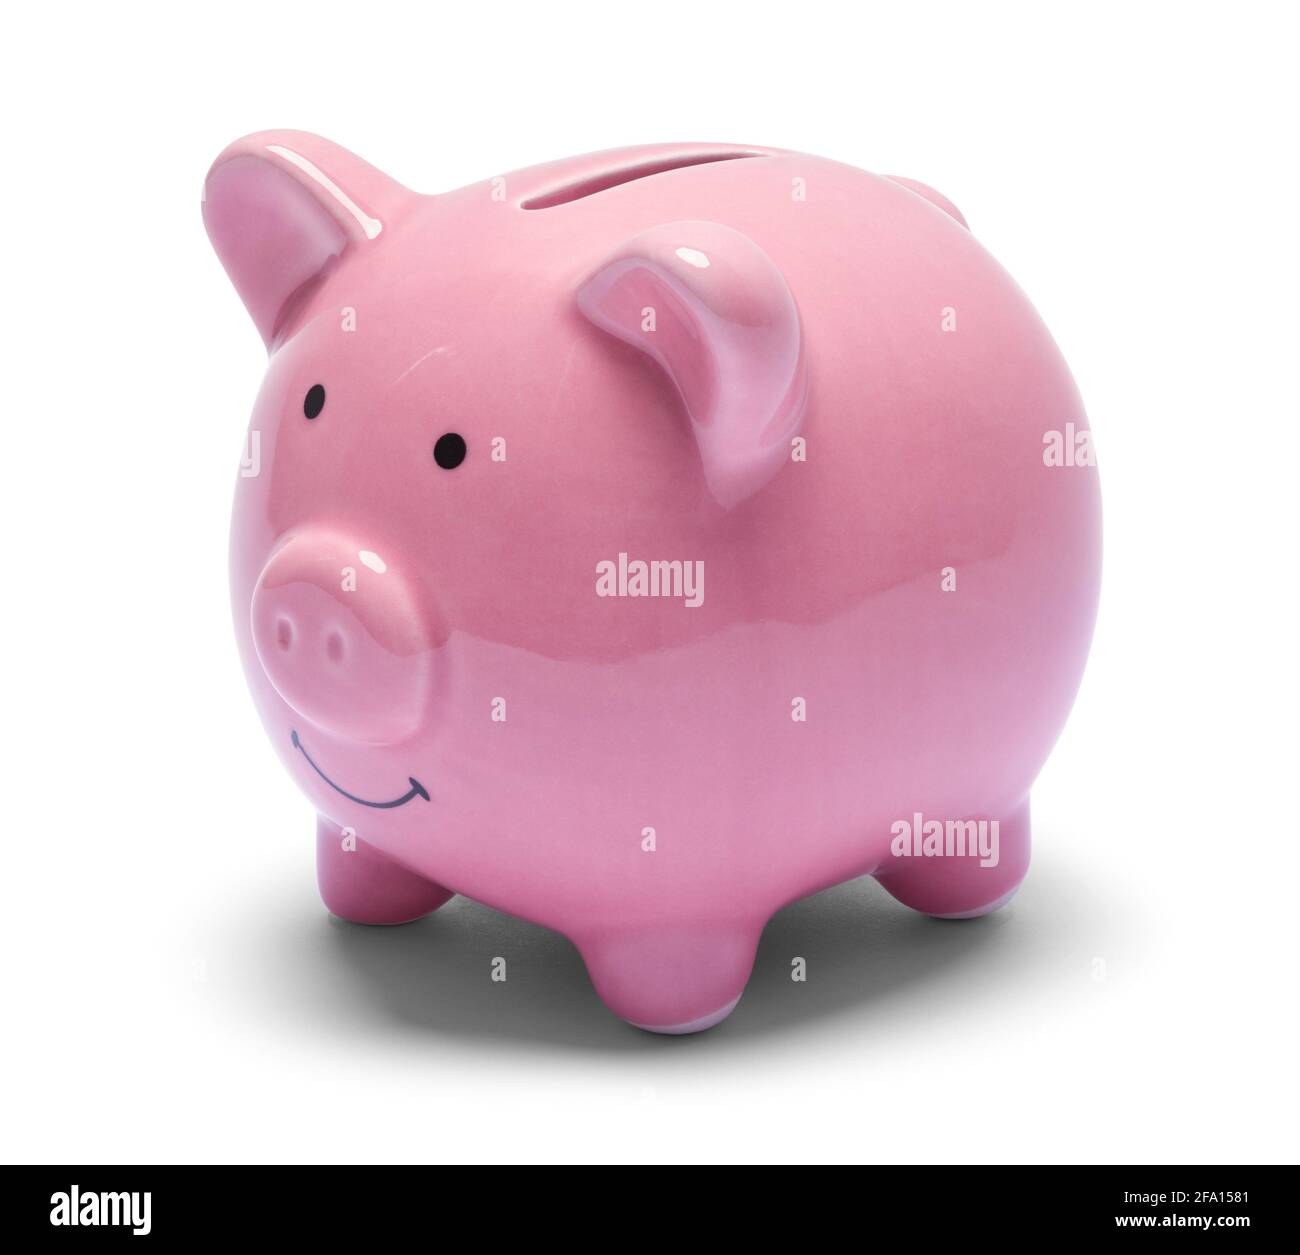 Pink Ceramic Piggy Bank with Smile Cut Out. Stock Photo